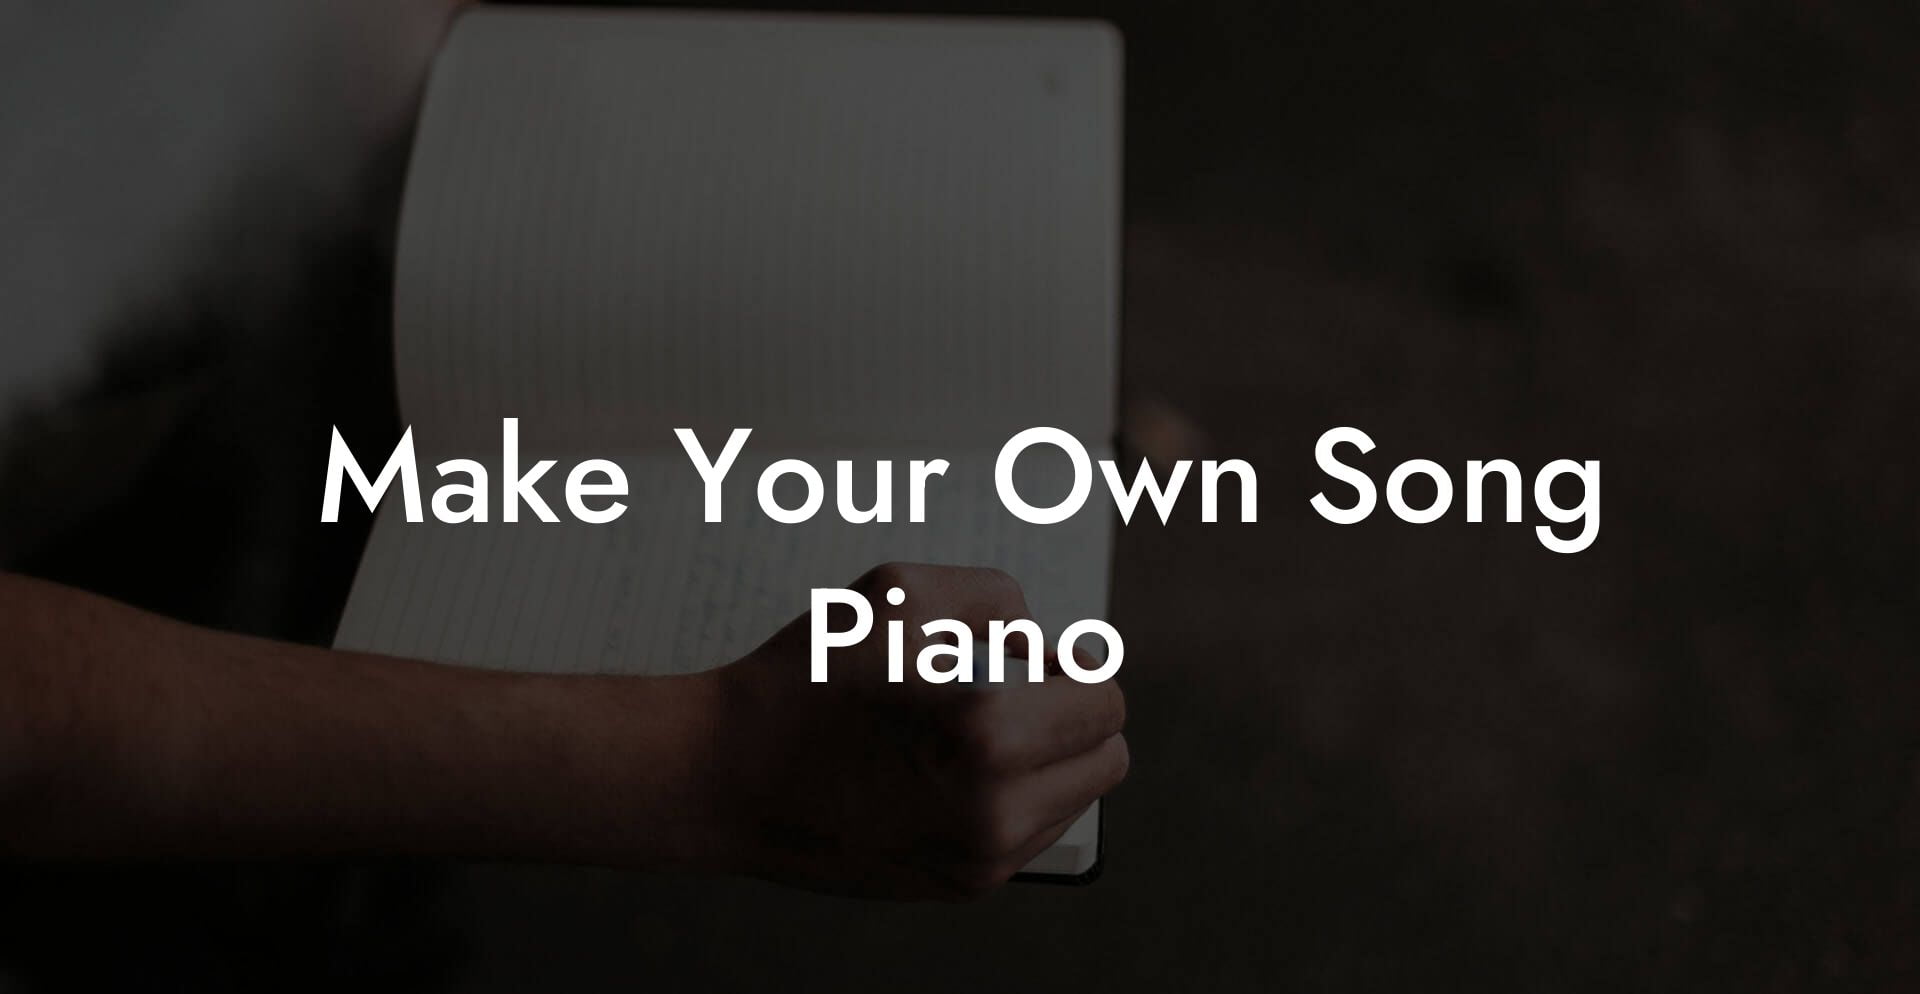 make your own song piano lyric assistant